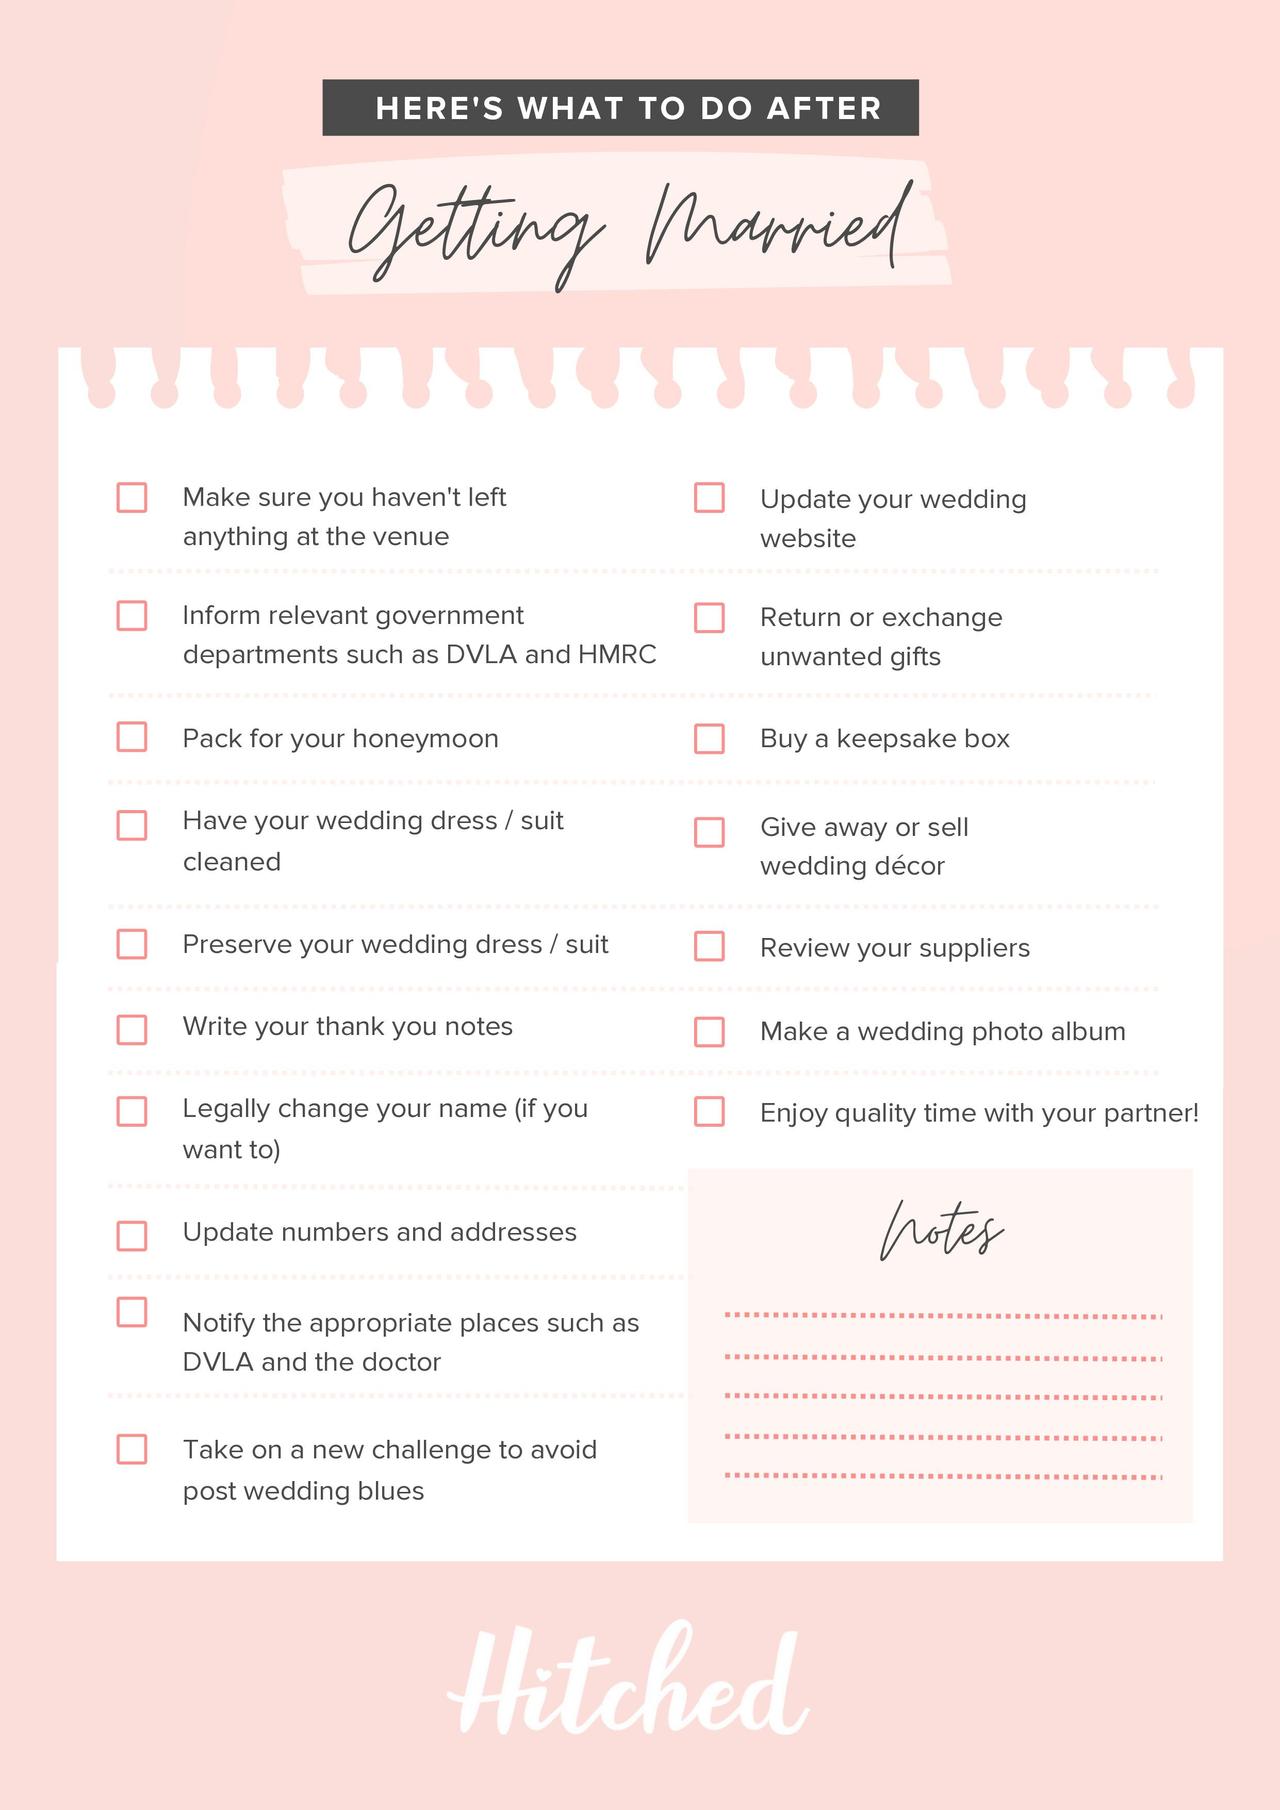 After Wedding Checklist: What to Do After Your Wedding - hitched.co.uk